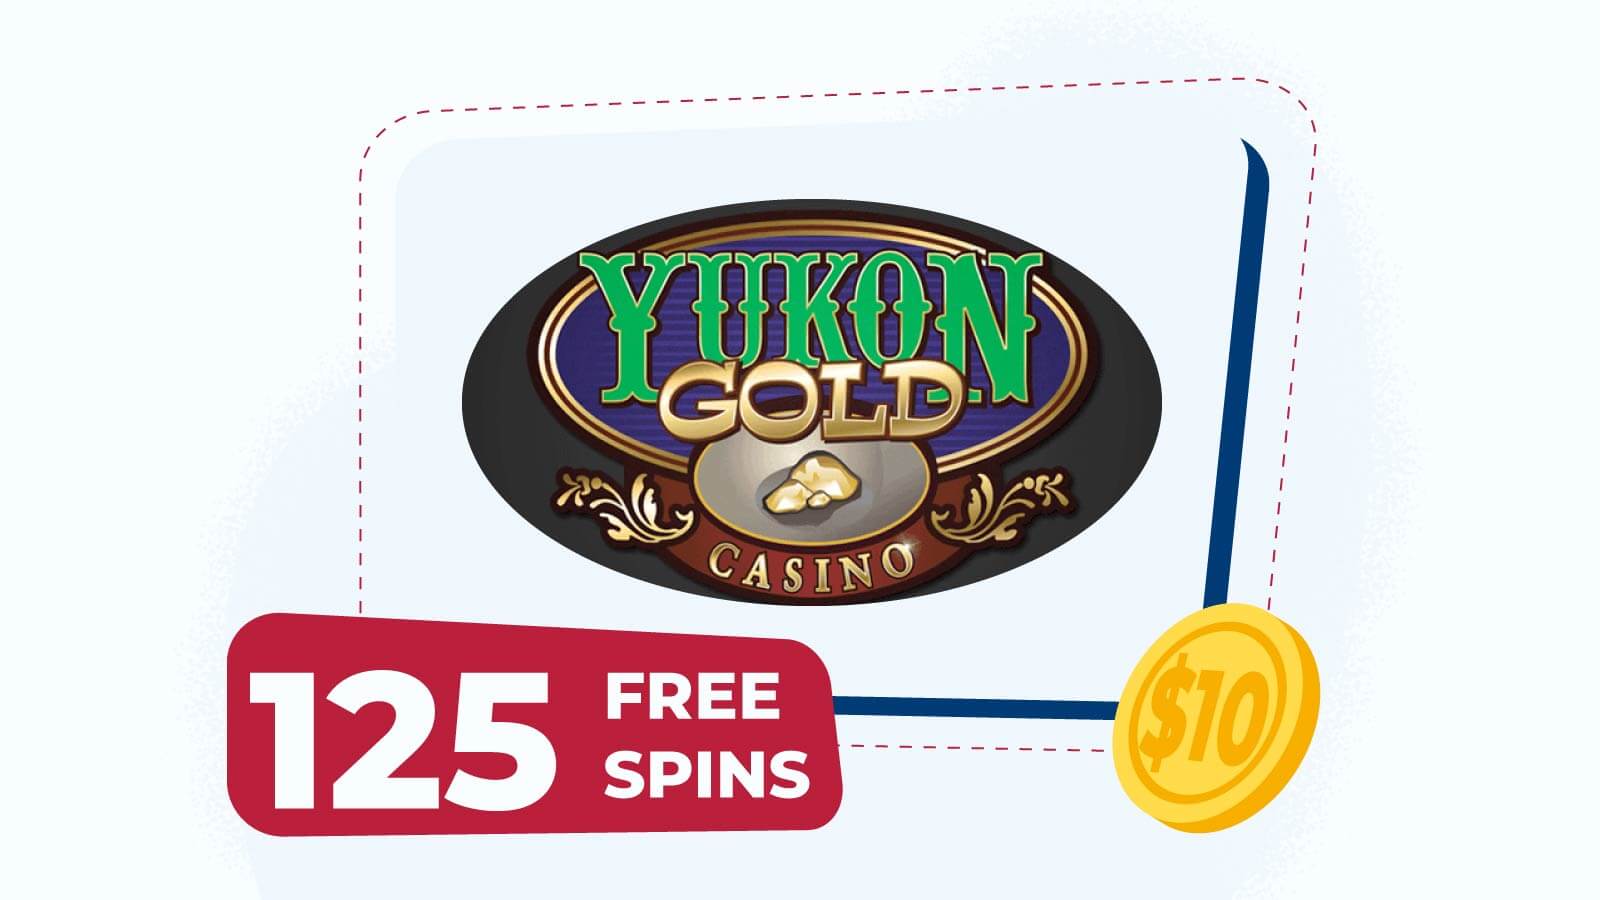 125 free spins for R$10 at Yukon Gold Casino Brazil